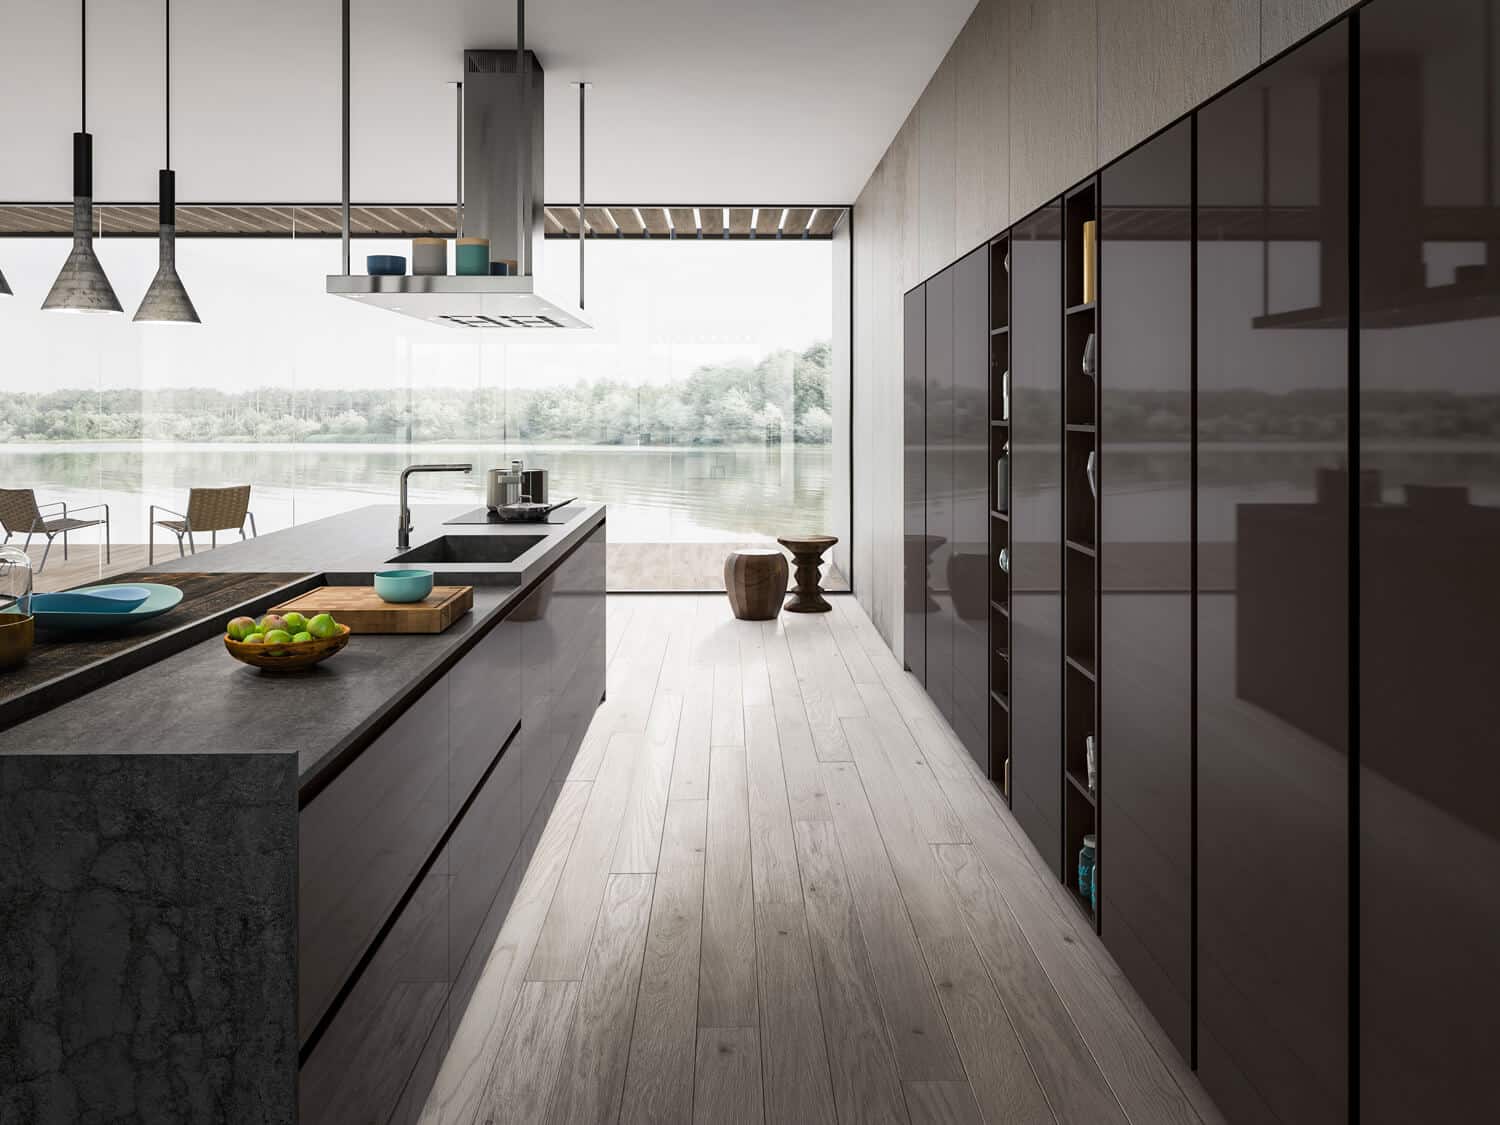 Luxury kitchen in Grigio Fumo high gloss lacquer, with integrated door channels in the same finish.